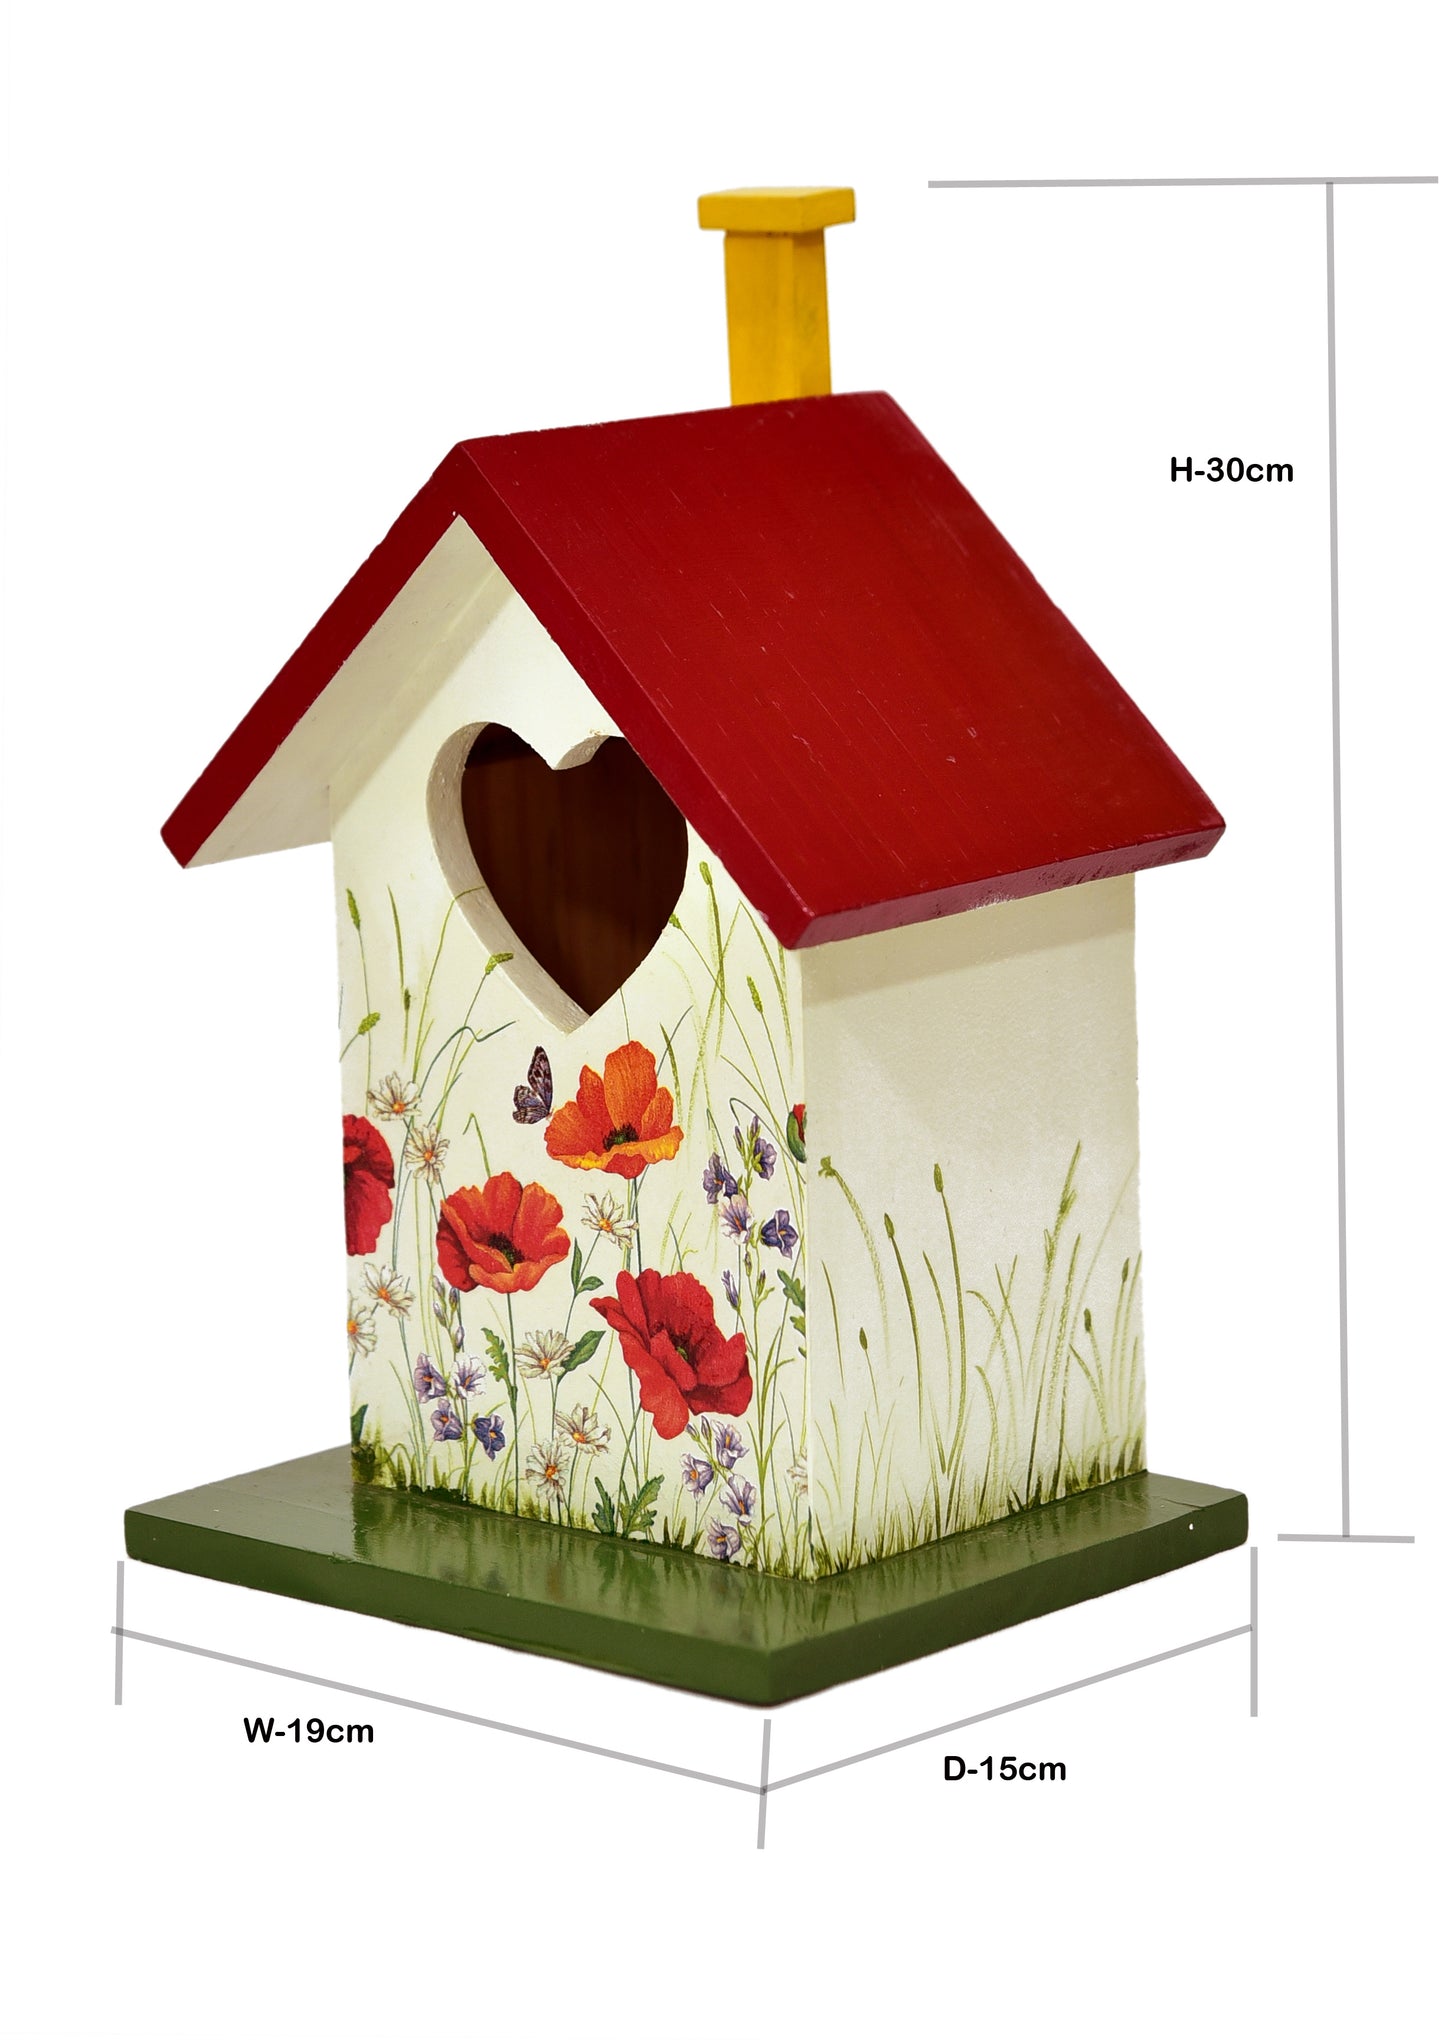 The Weaver's Nest Wooden Birdhouse with Poppies